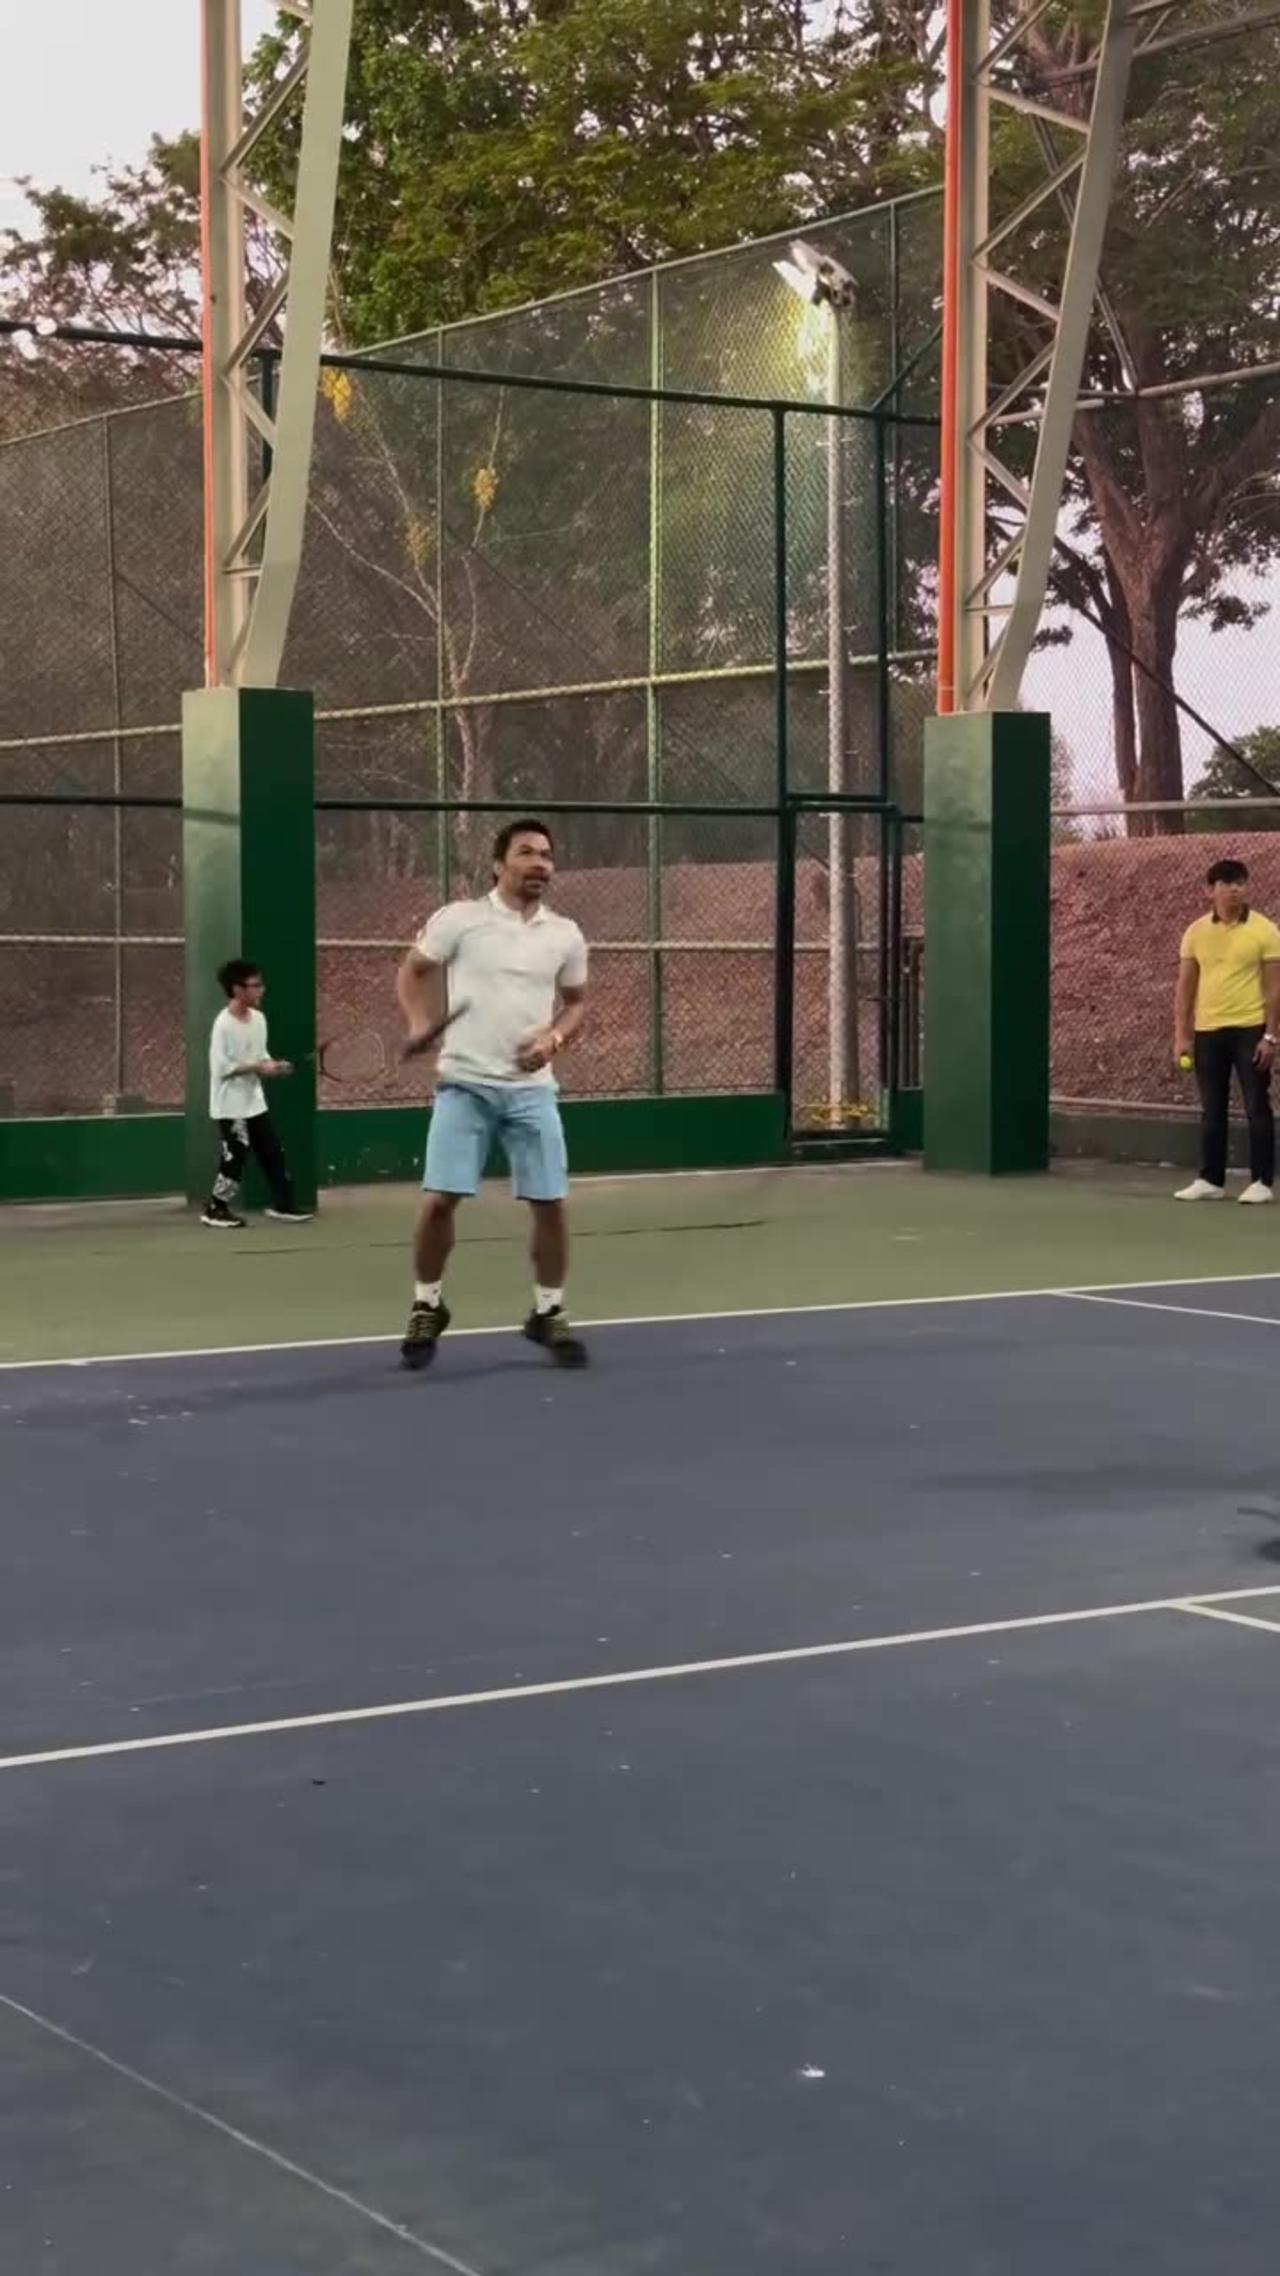 Manny Pacquiao learning tennis